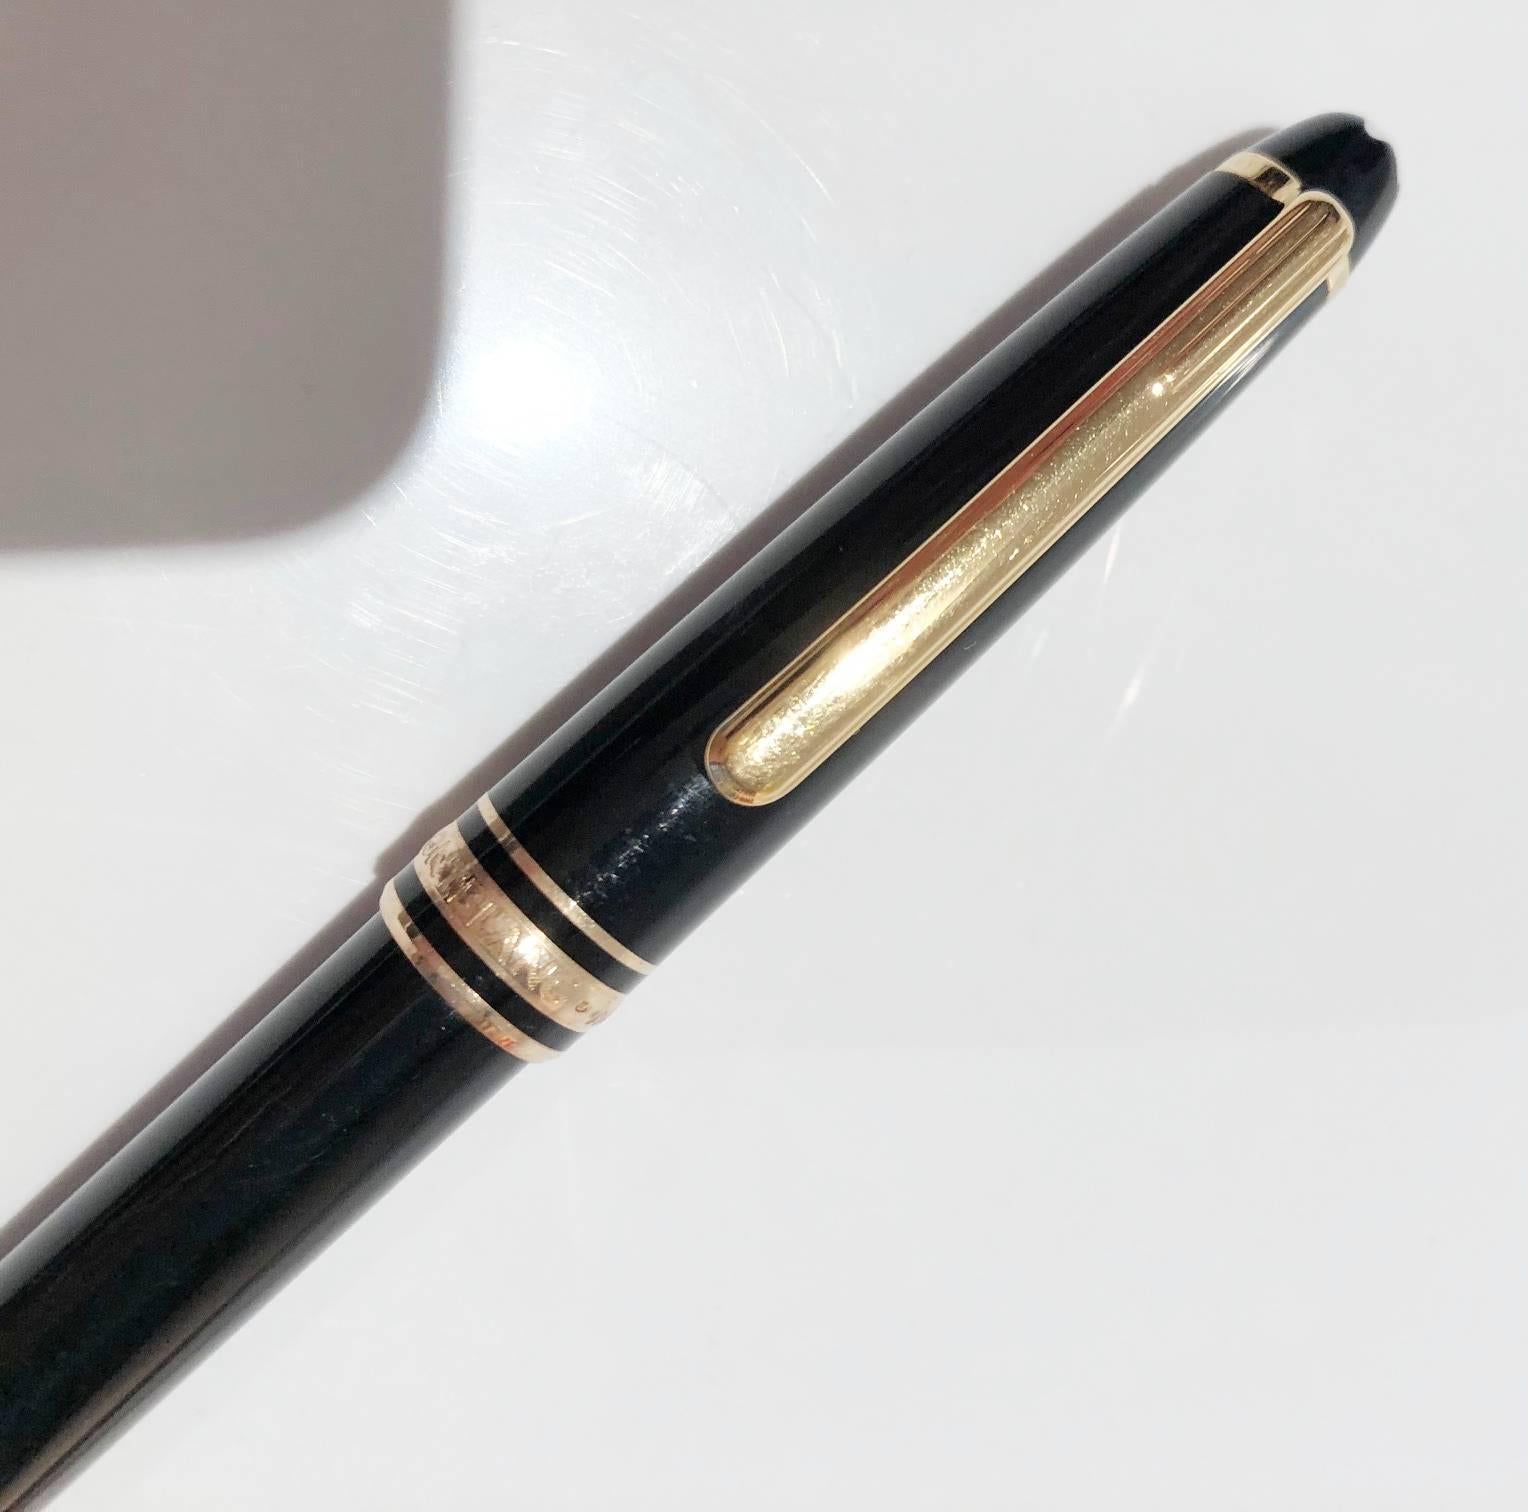 FREE UK and WORLDWIDE DELIVERY 

Montblanc Meisterstück Classique ballpoint pen in black precious resin
The ballpoint features a simple twist mechanism to ensure the ink cartridge is protected when not in use.
The cap of the pen is decorated with a